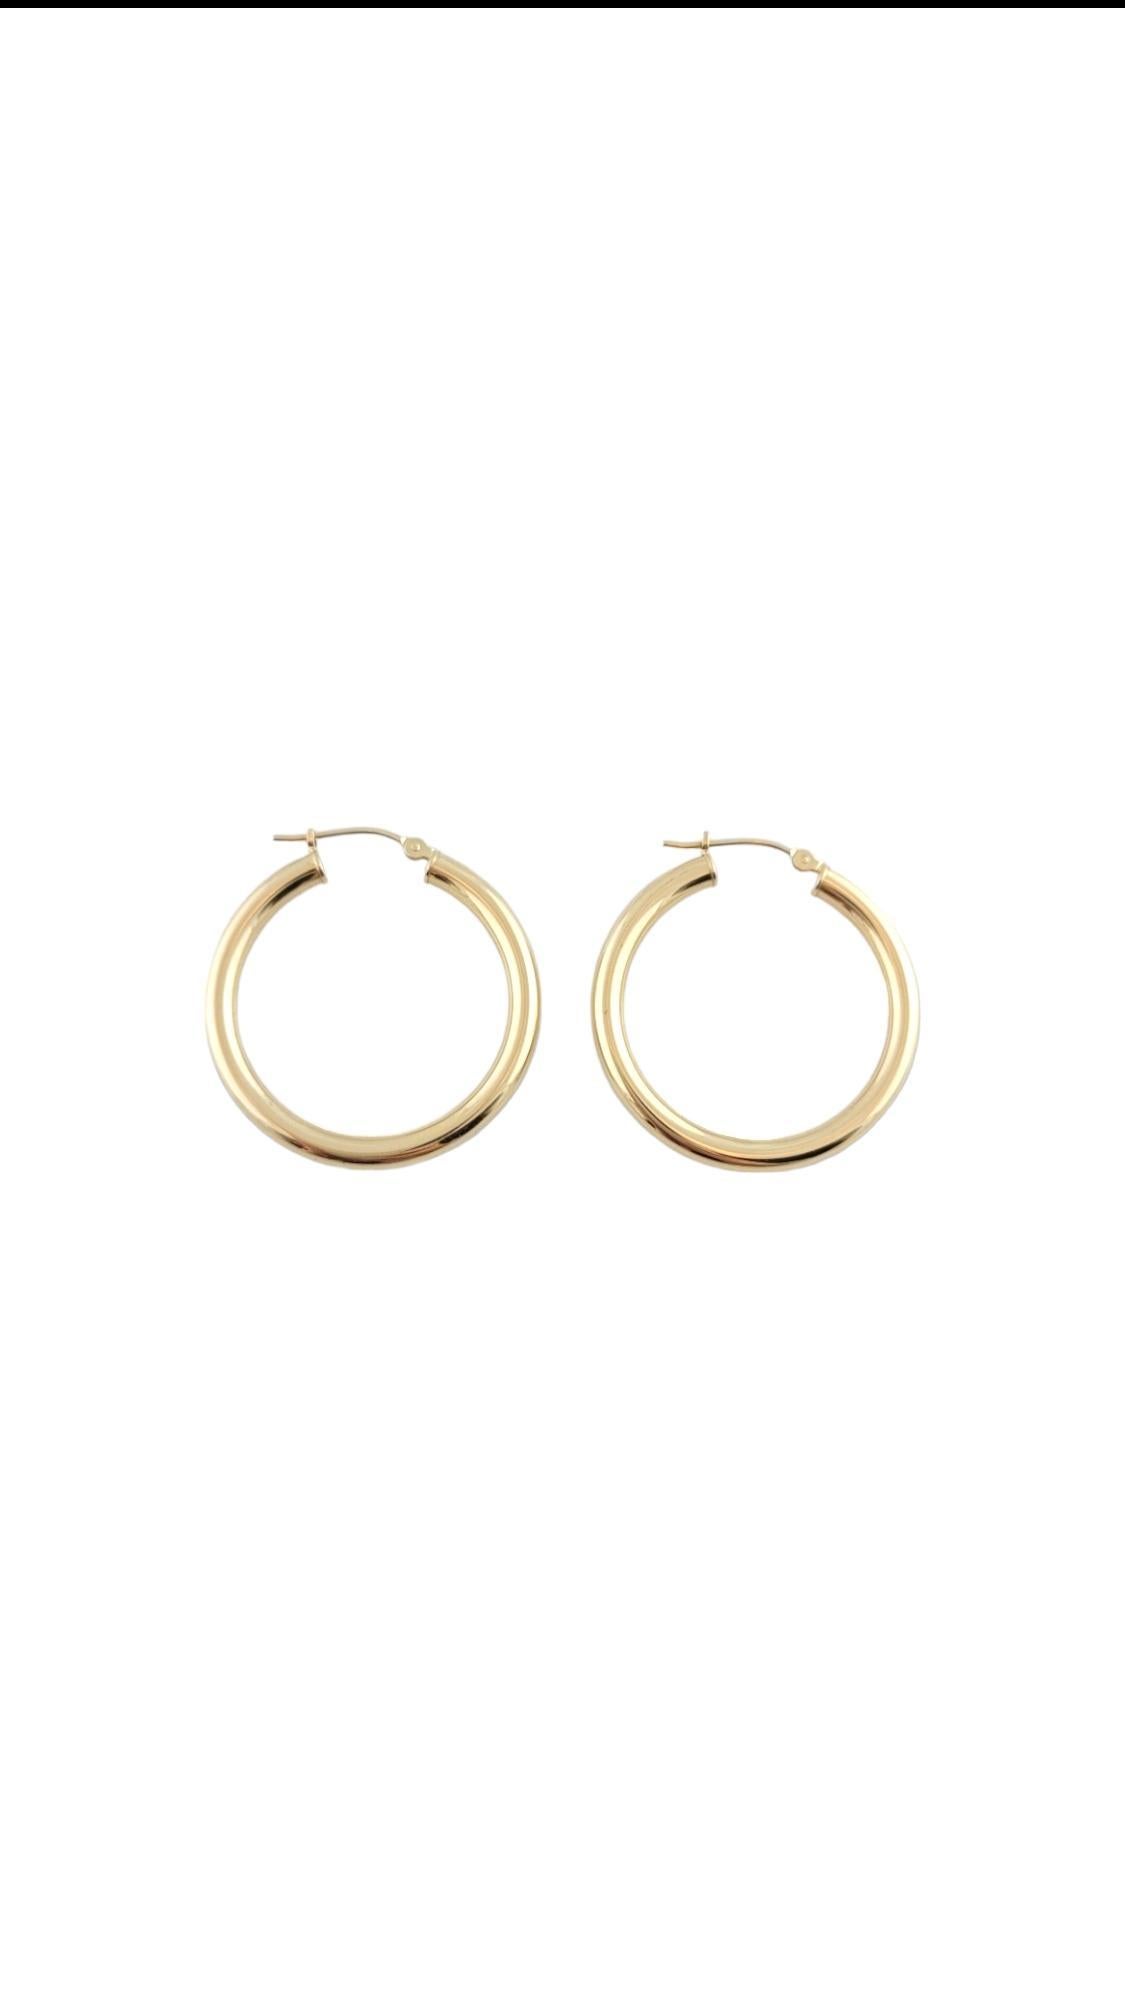 Vintage 14K Yellow Gold Hoop Earrings

Latch back hoop earrings in 14 karat yellow gold.

Hallmark: 14K MB

Weight: 2.11 g/ 1.36 dwt.

Diameter- 30 mm/ 1.2 in.

3 mm thick

Very good condition, professionally polished.

Will come packaged in a gift